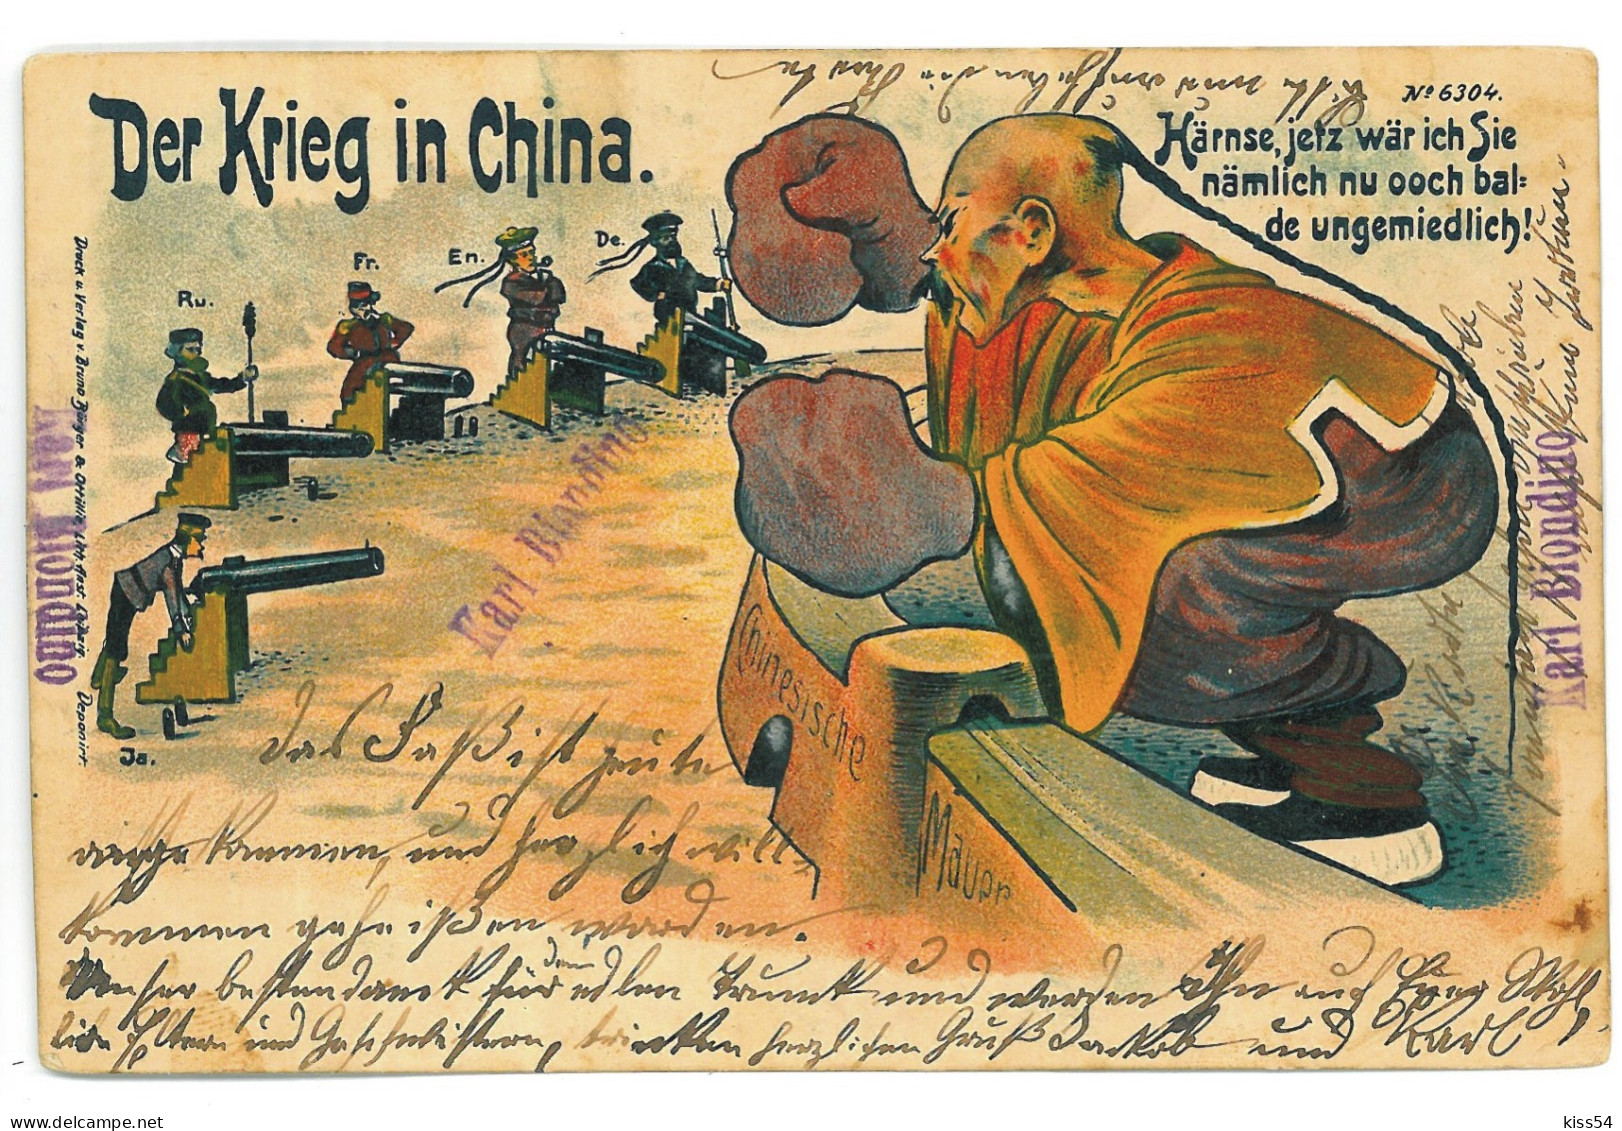 CH 38 - 20352 The German-Chinese War, Litho, China - Old Postcard - Used - 1900 - China